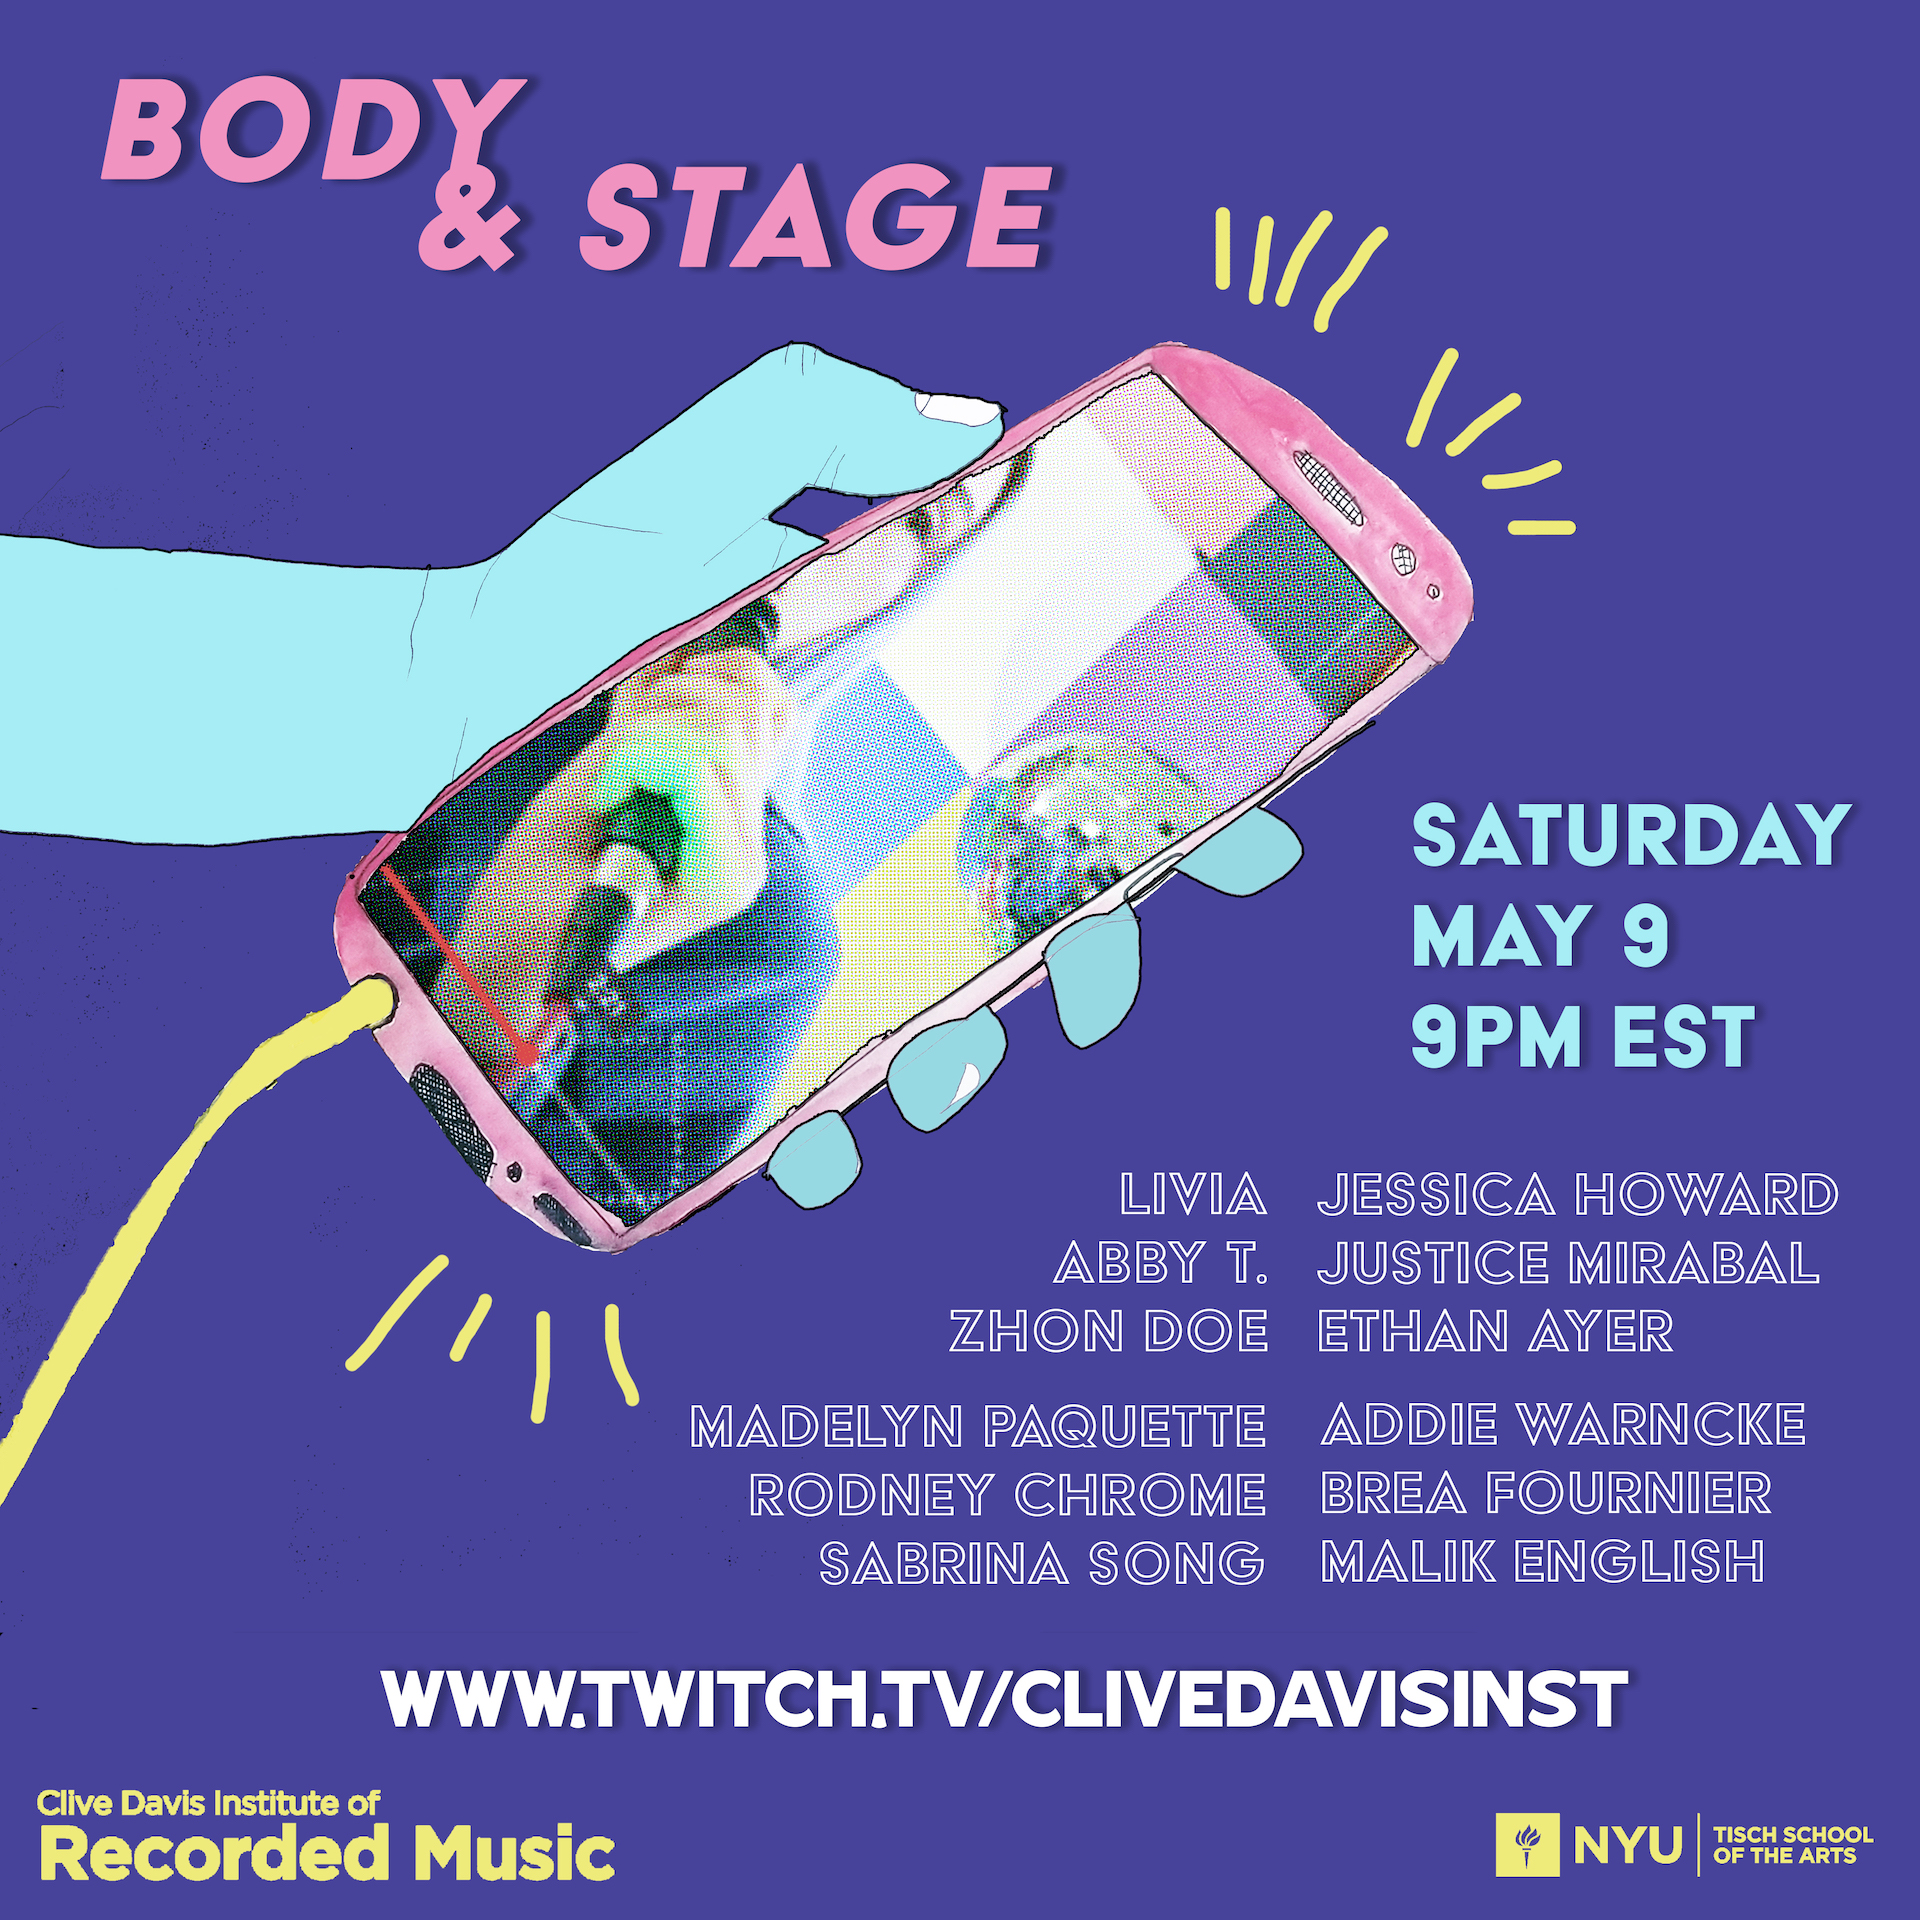 Flyer featuring the "Body & Stage" Perfromance Showcase on Twitch.TV/CliveDavisInst on May 9th at 9pm ET